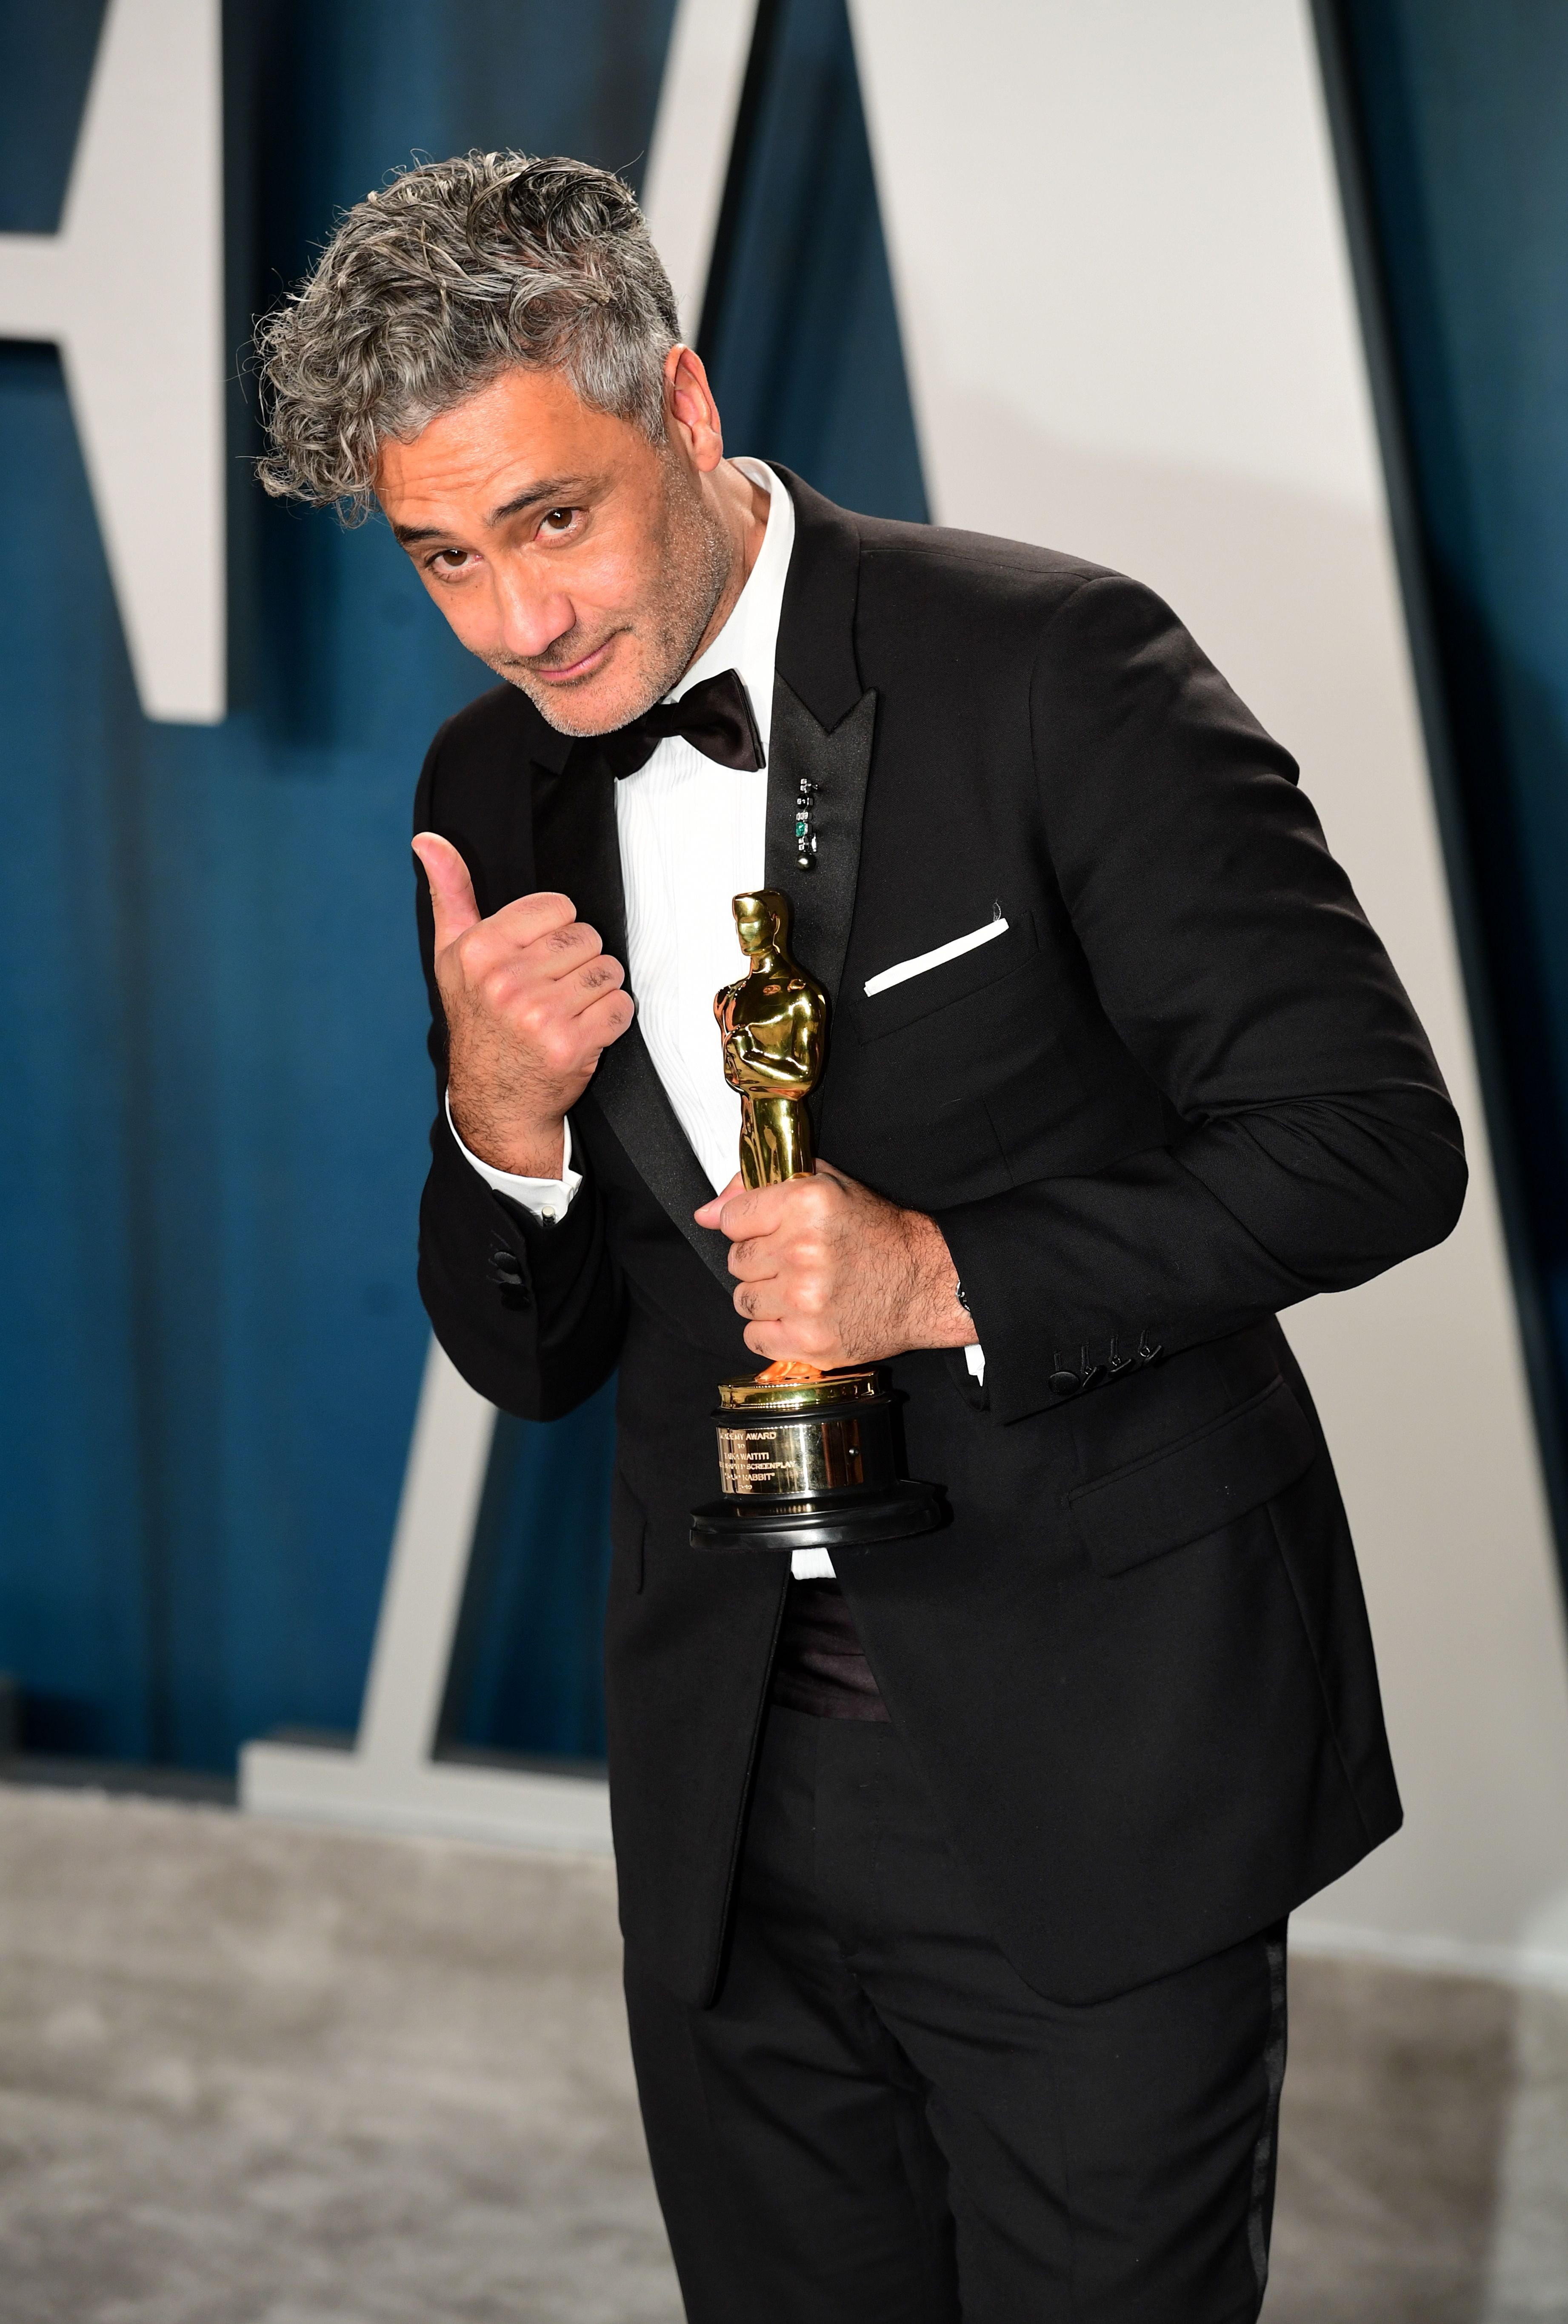 Taika Waititi during the Vanity Fair Oscar Party held at the Wallis Annenberg Center for the Performing Arts in Beverly Hills, Los Angeles, California, USA | Source: Getty Images